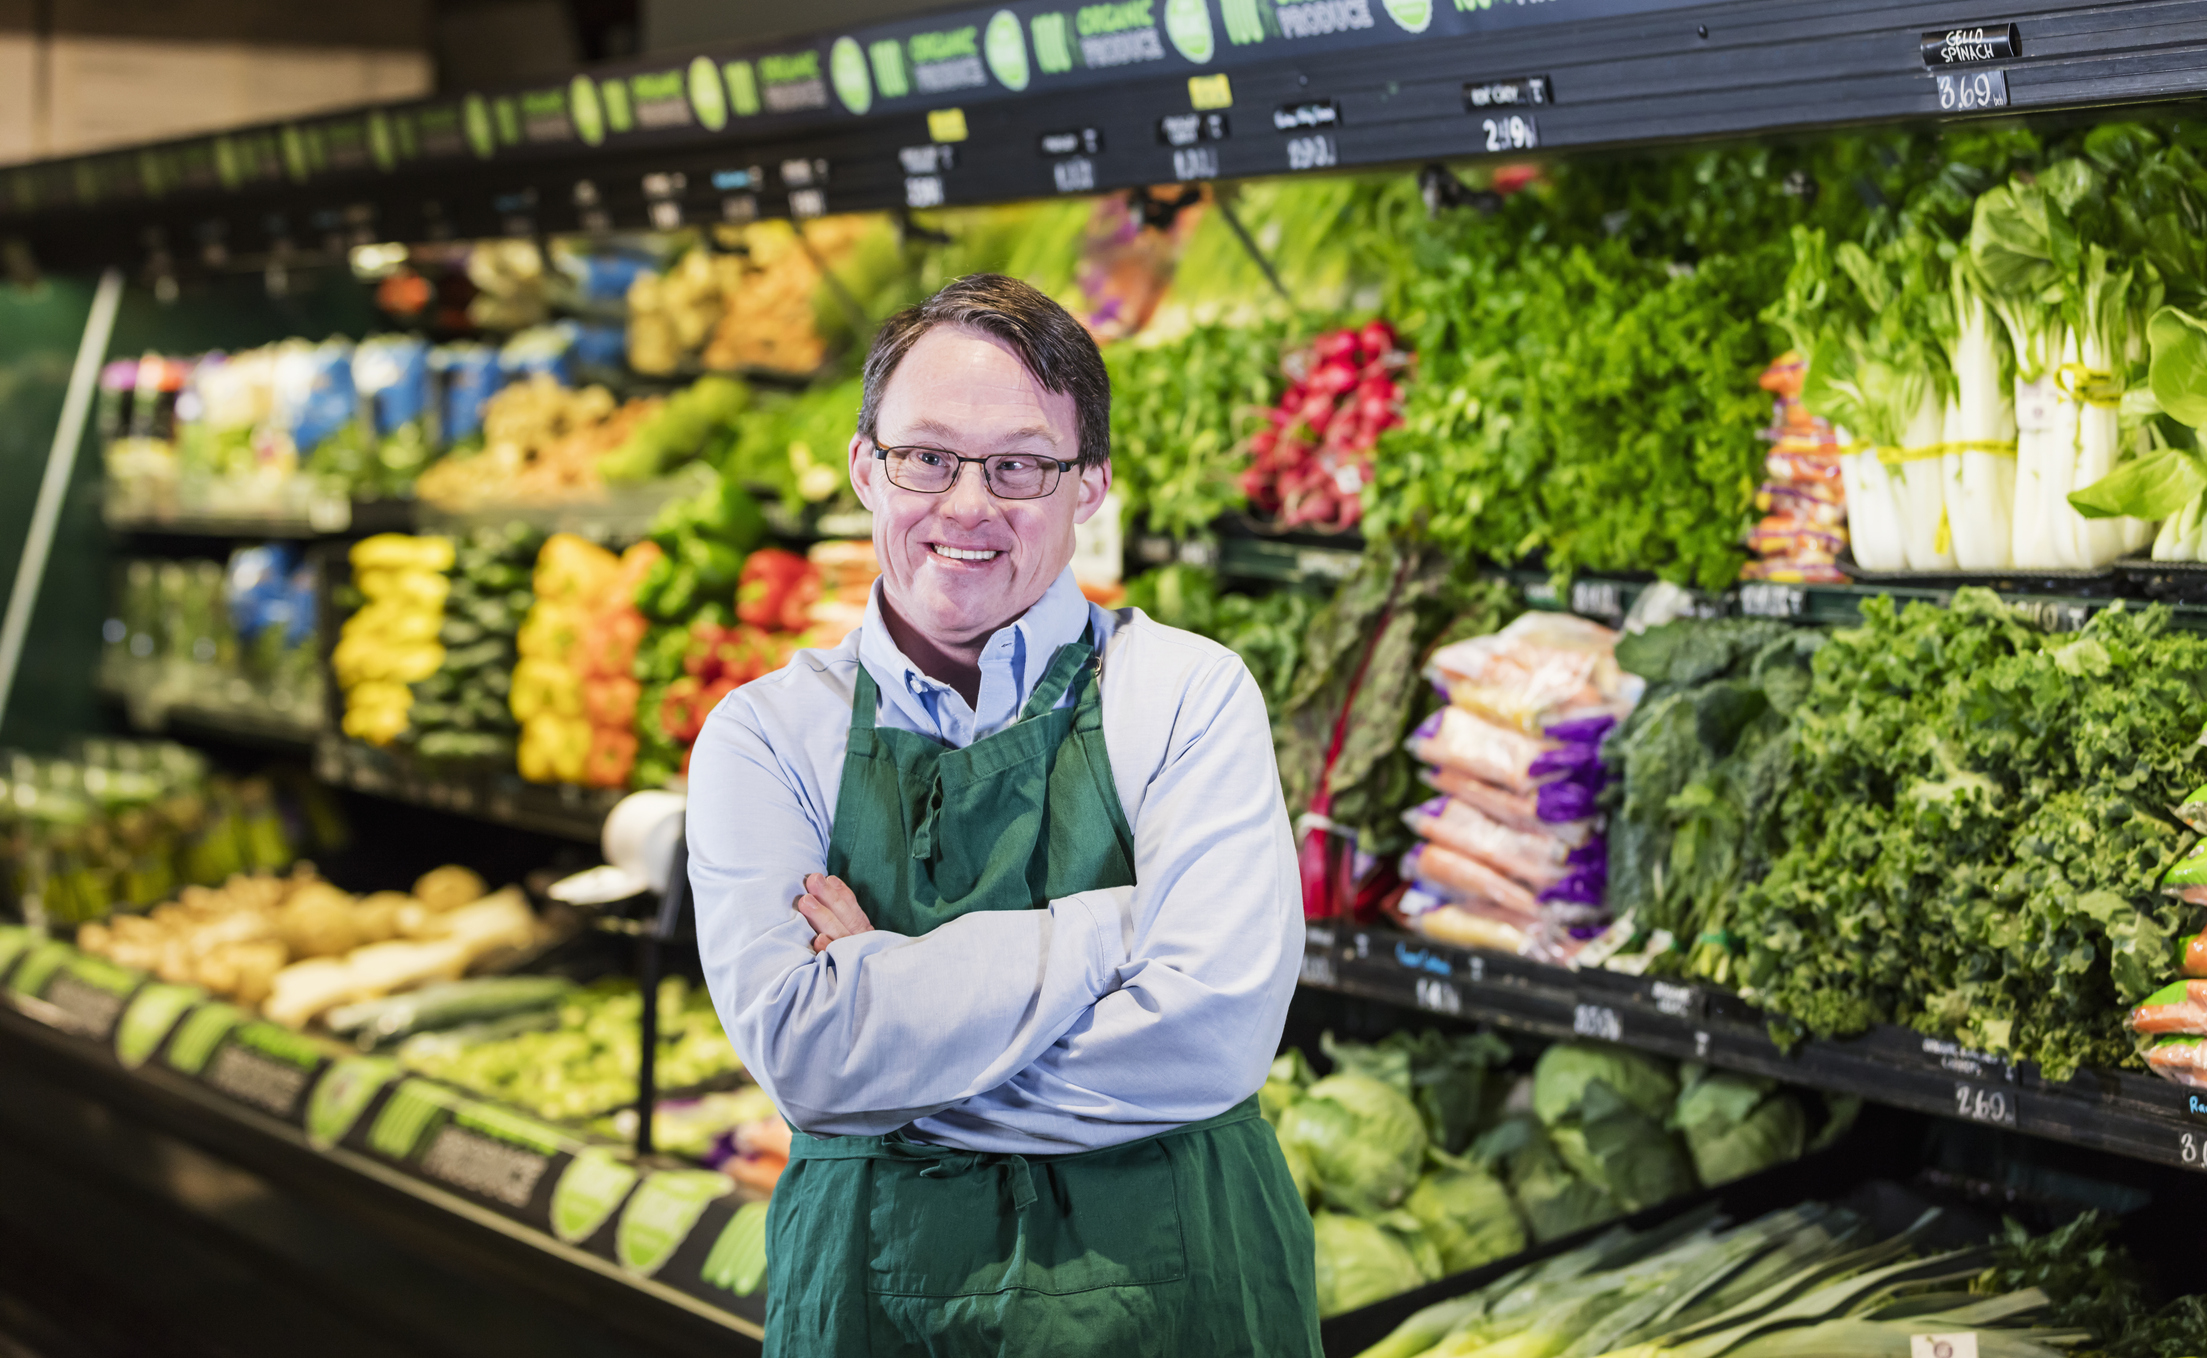 A mature man in his 40s with down syndrome working in a supermarket. He is wearing an apron, standing in the produce section of the store, looking toward the camera with his hands on his hips.